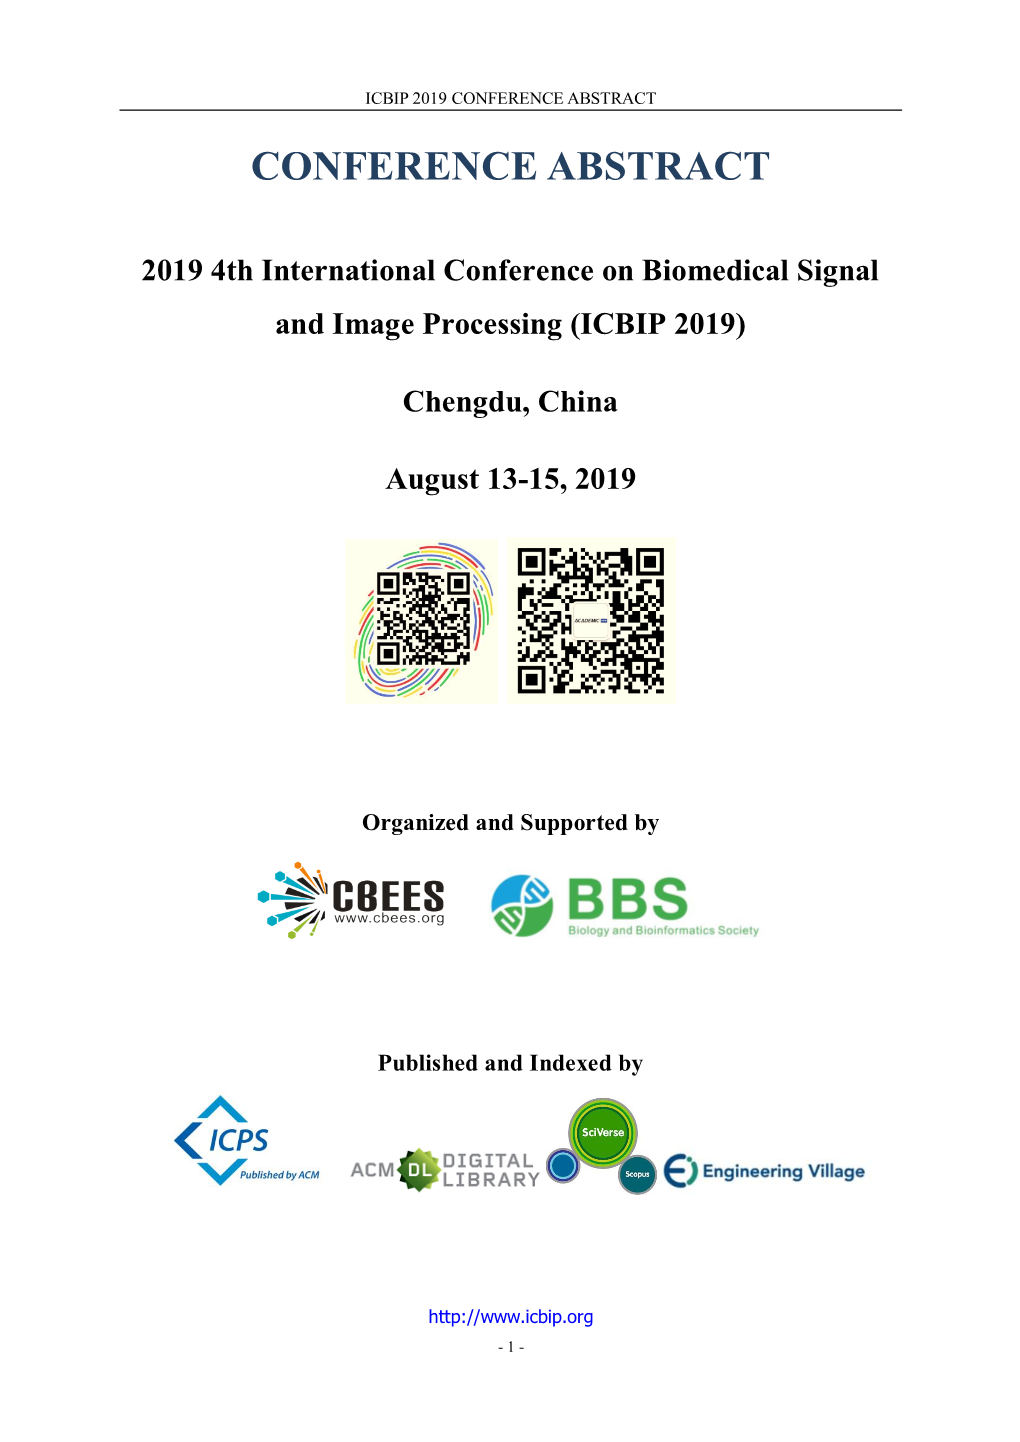 Program of ICBIP 2019 Is Updated Now